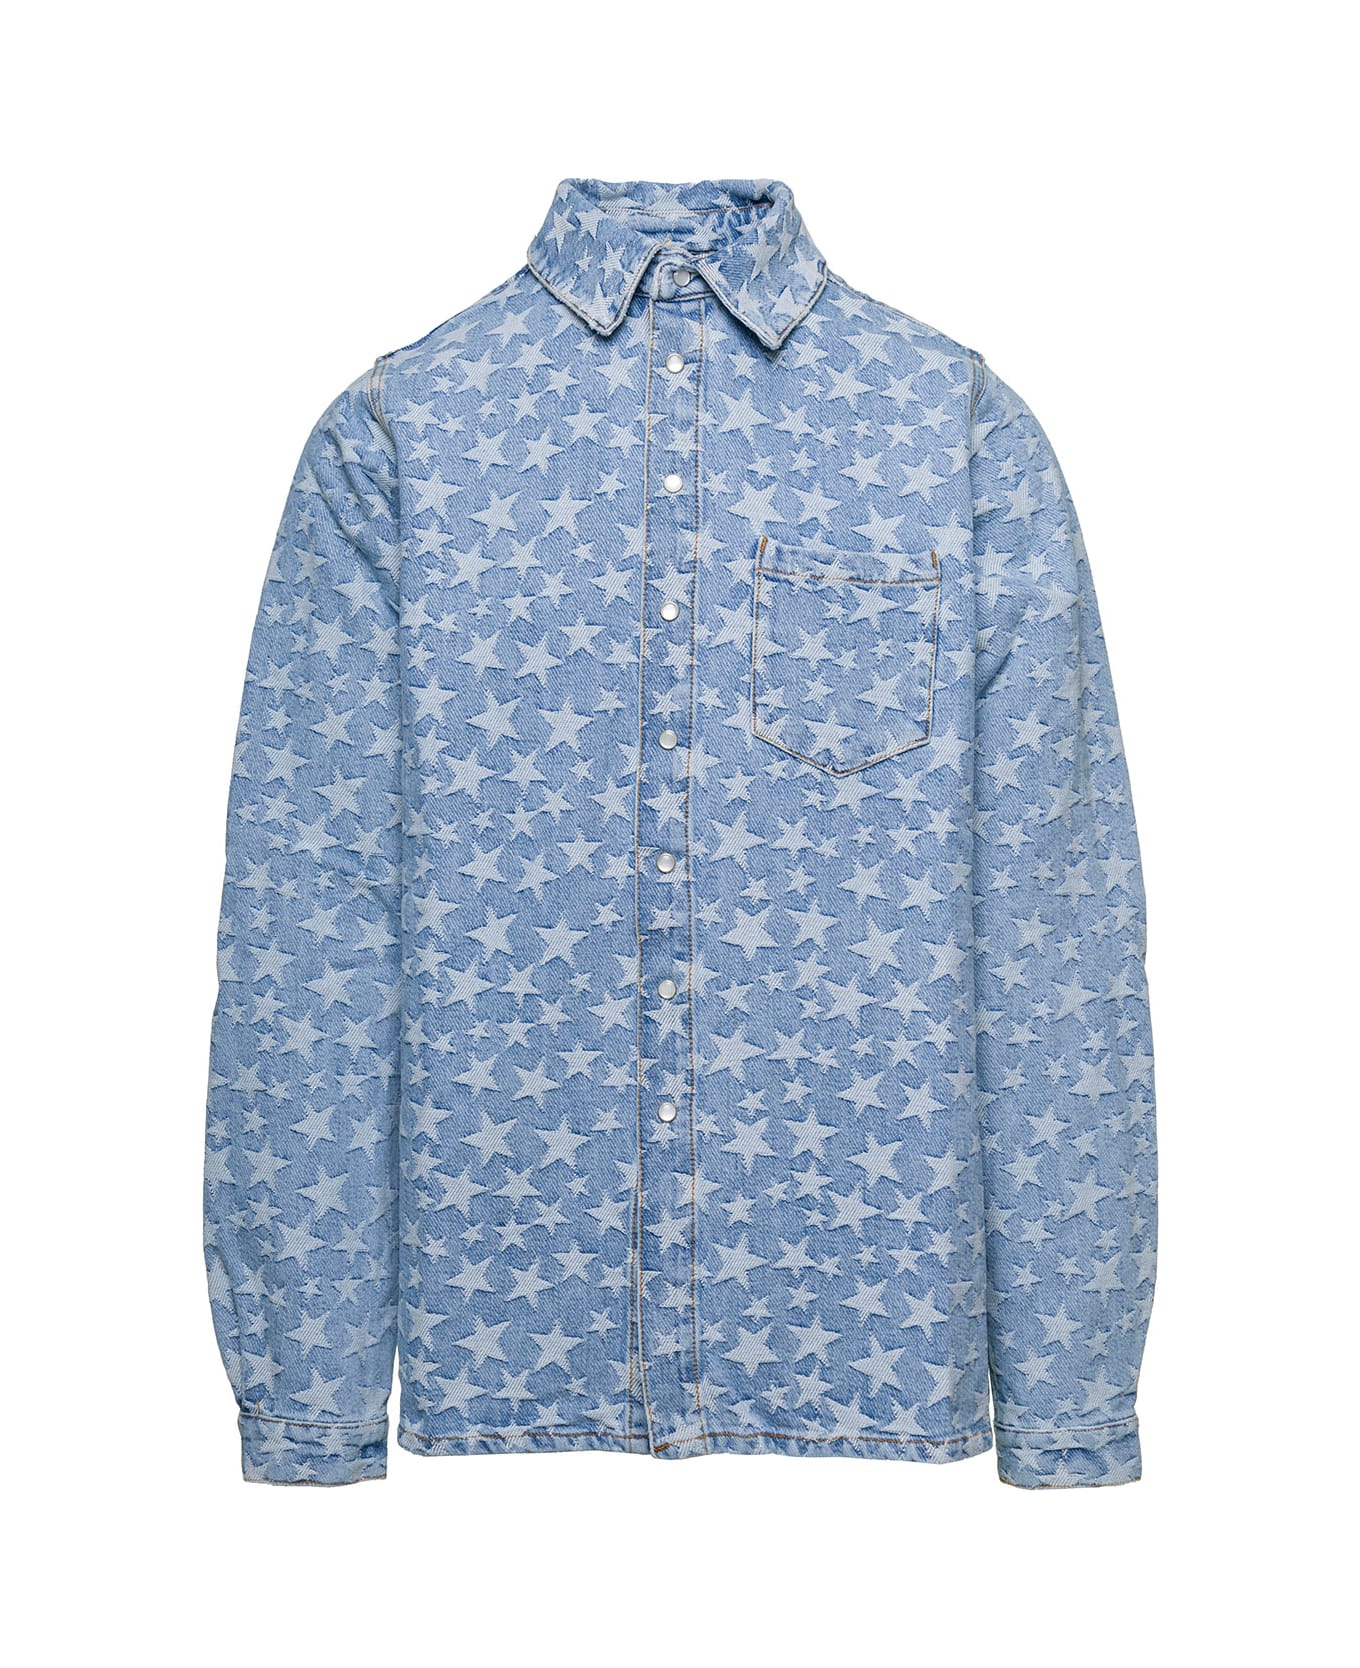 ERL Light Blue Long Sleeve Shirt With All-over Star Print In Cotton Denim - Light blue シャツ